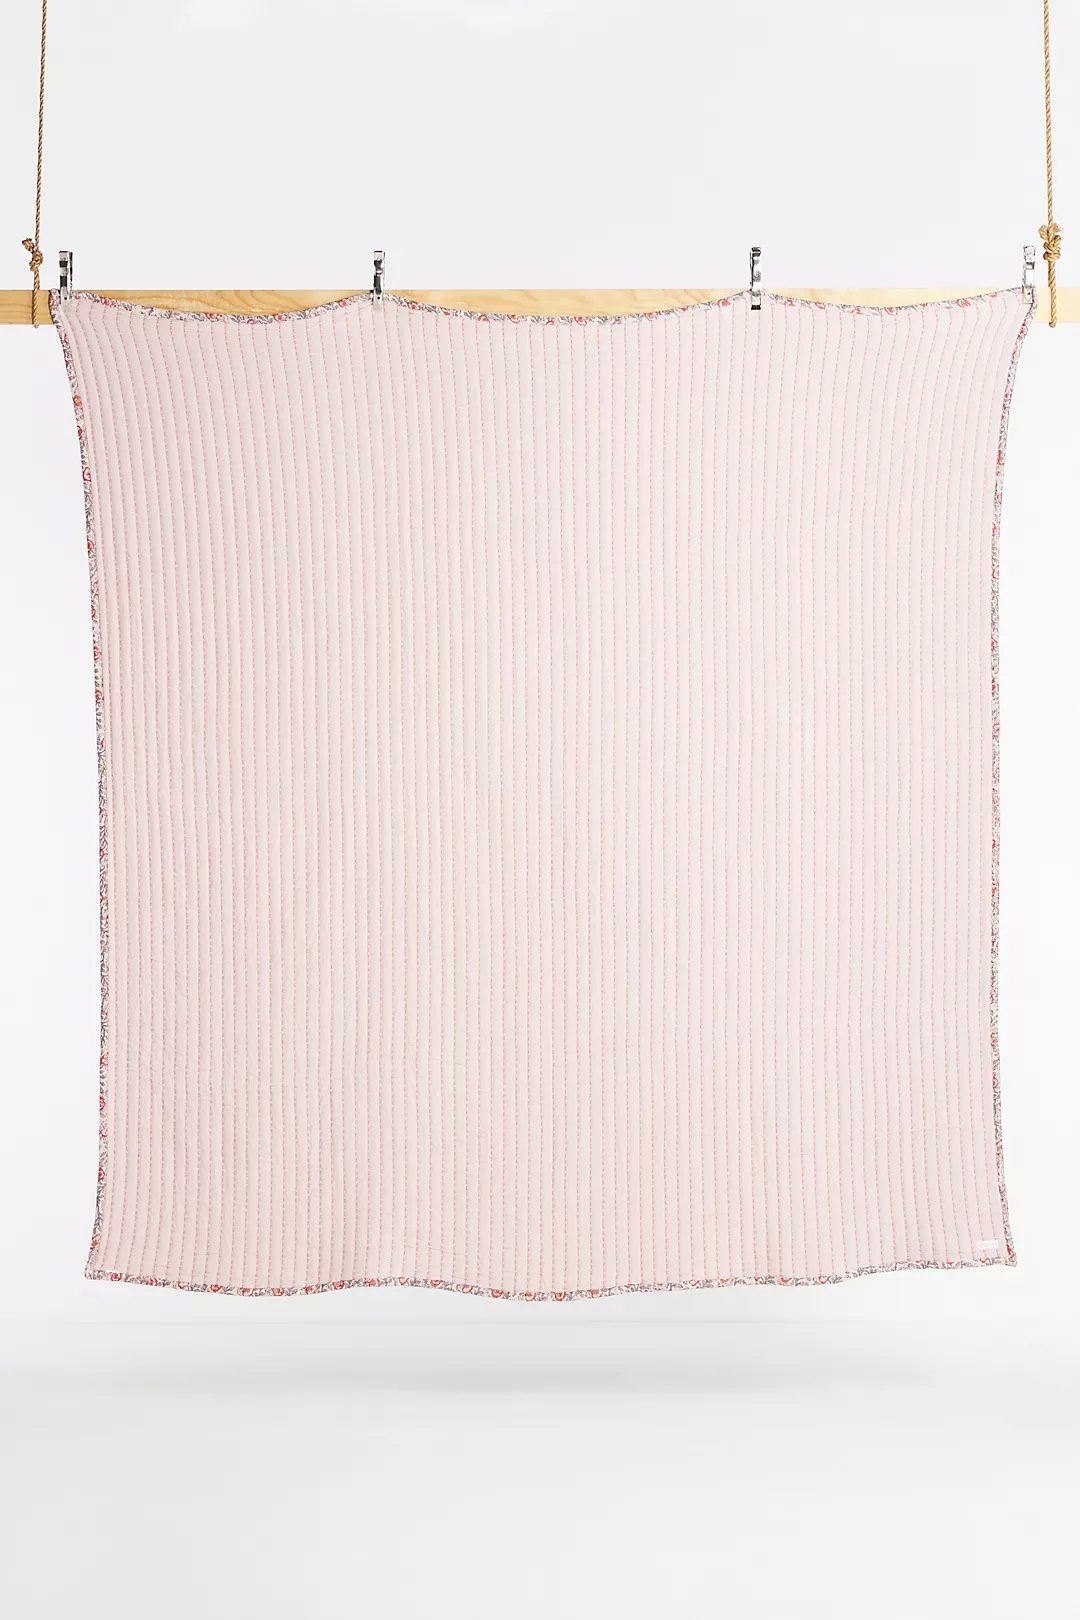 Rowena Coverlet By Amber Lewis for Anthropologie in Pink, King - Image 4